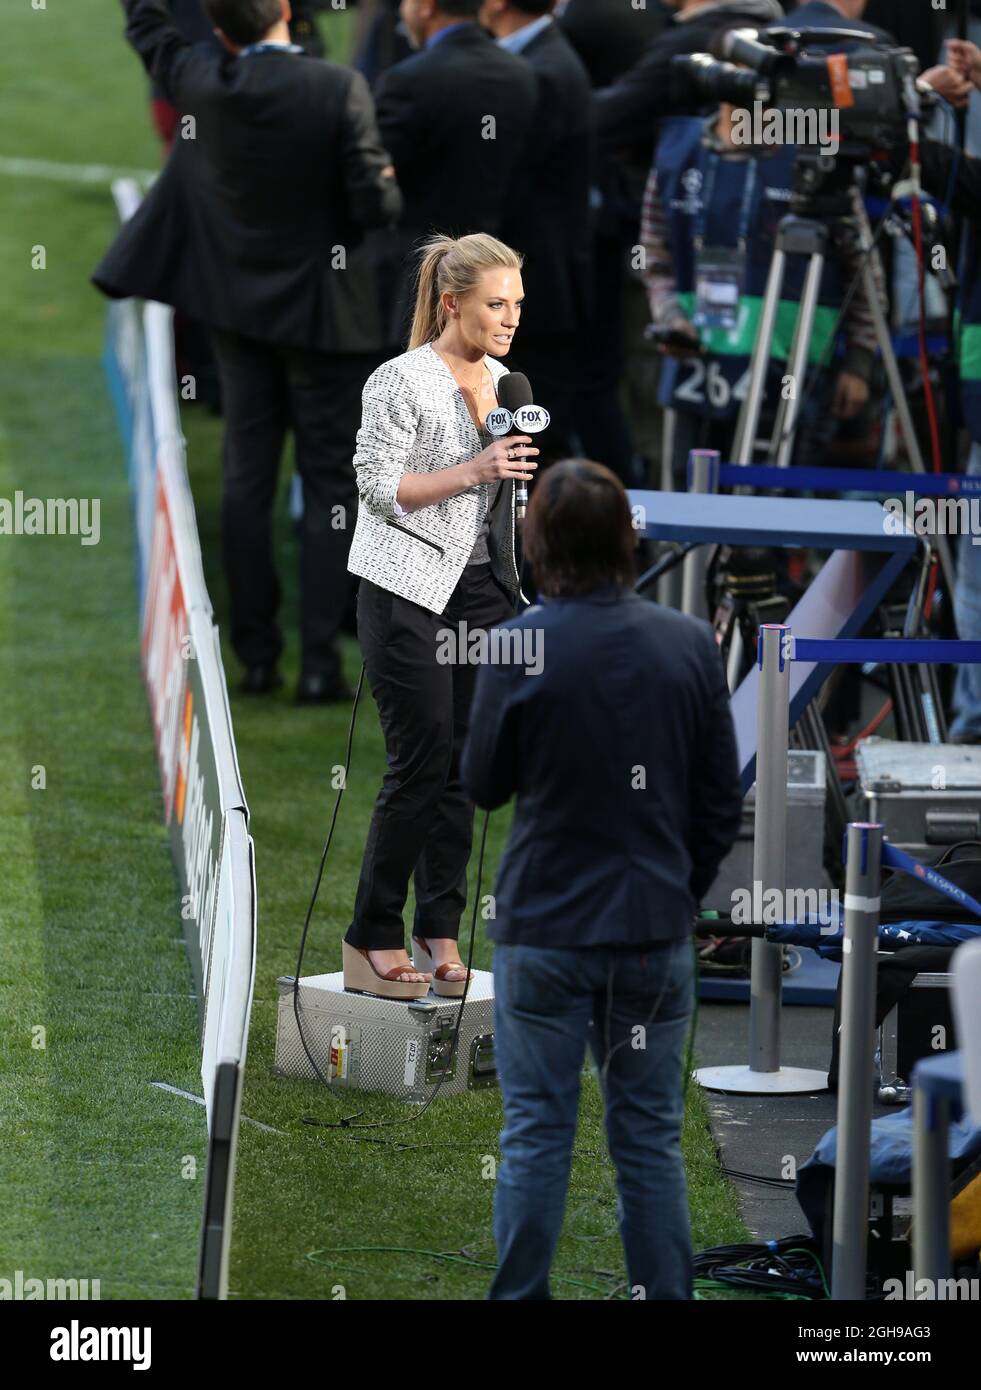 Fox tv presenter Georgie Thompson has to stand on a box when presenting during a training session ahead of Saturday's Champions League final soccer match between Real Madrid and Atletico Madrid, in Estadio da Luz stadium in Lisbon, Portugal, Friday, May 23, 2014. Pic David Klein/Sportimage. Stock Photo